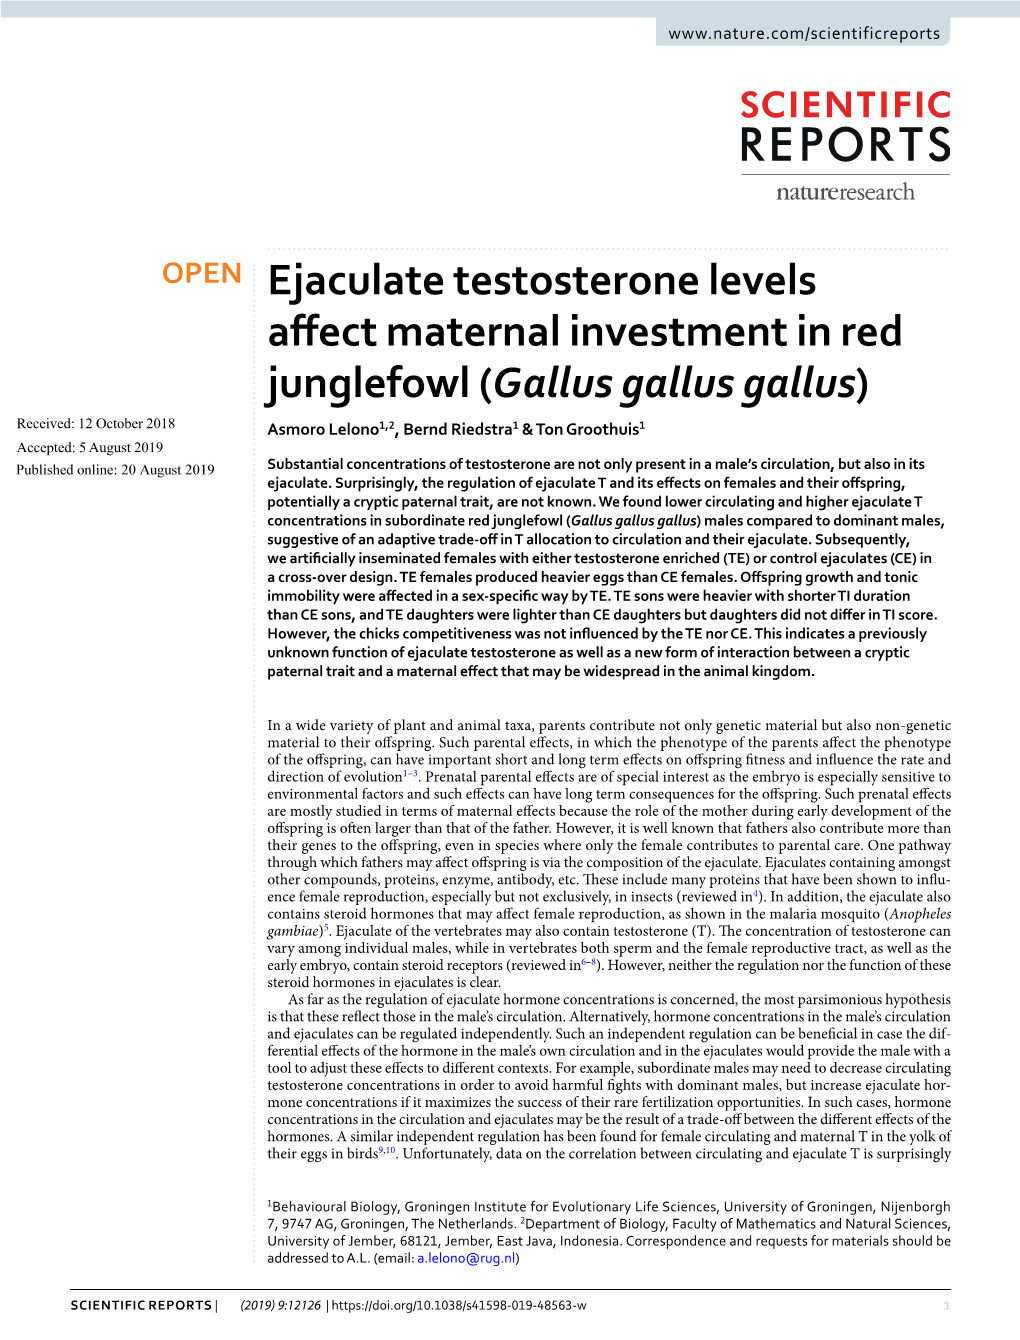 Ejaculate Testosterone Levels Affect Maternal Investment in Red Junglefowl